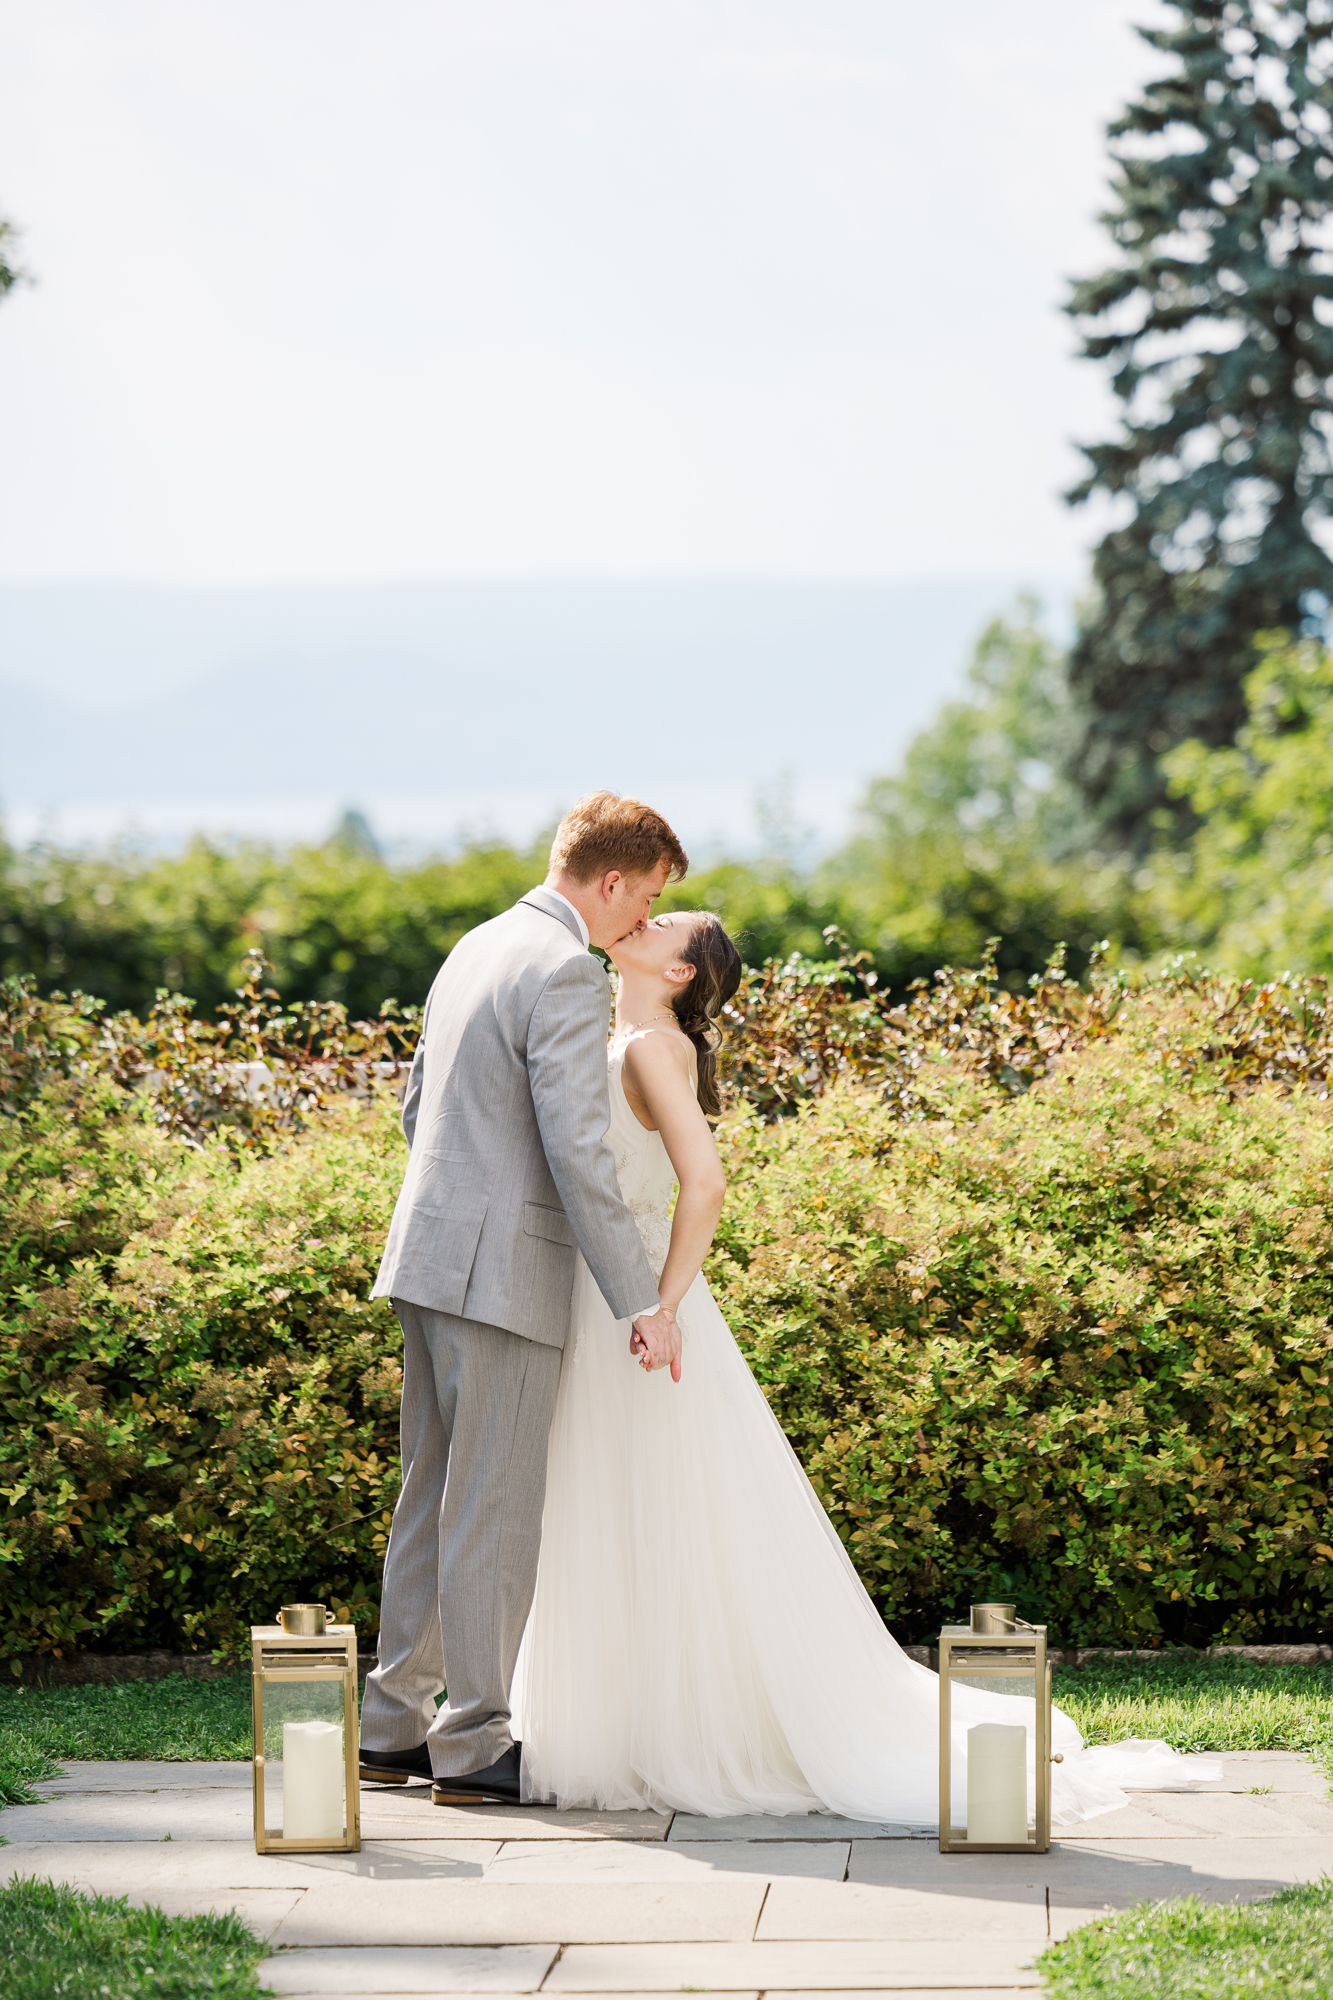 Stunning Wedding at Briarcliff Manor in Westchester County